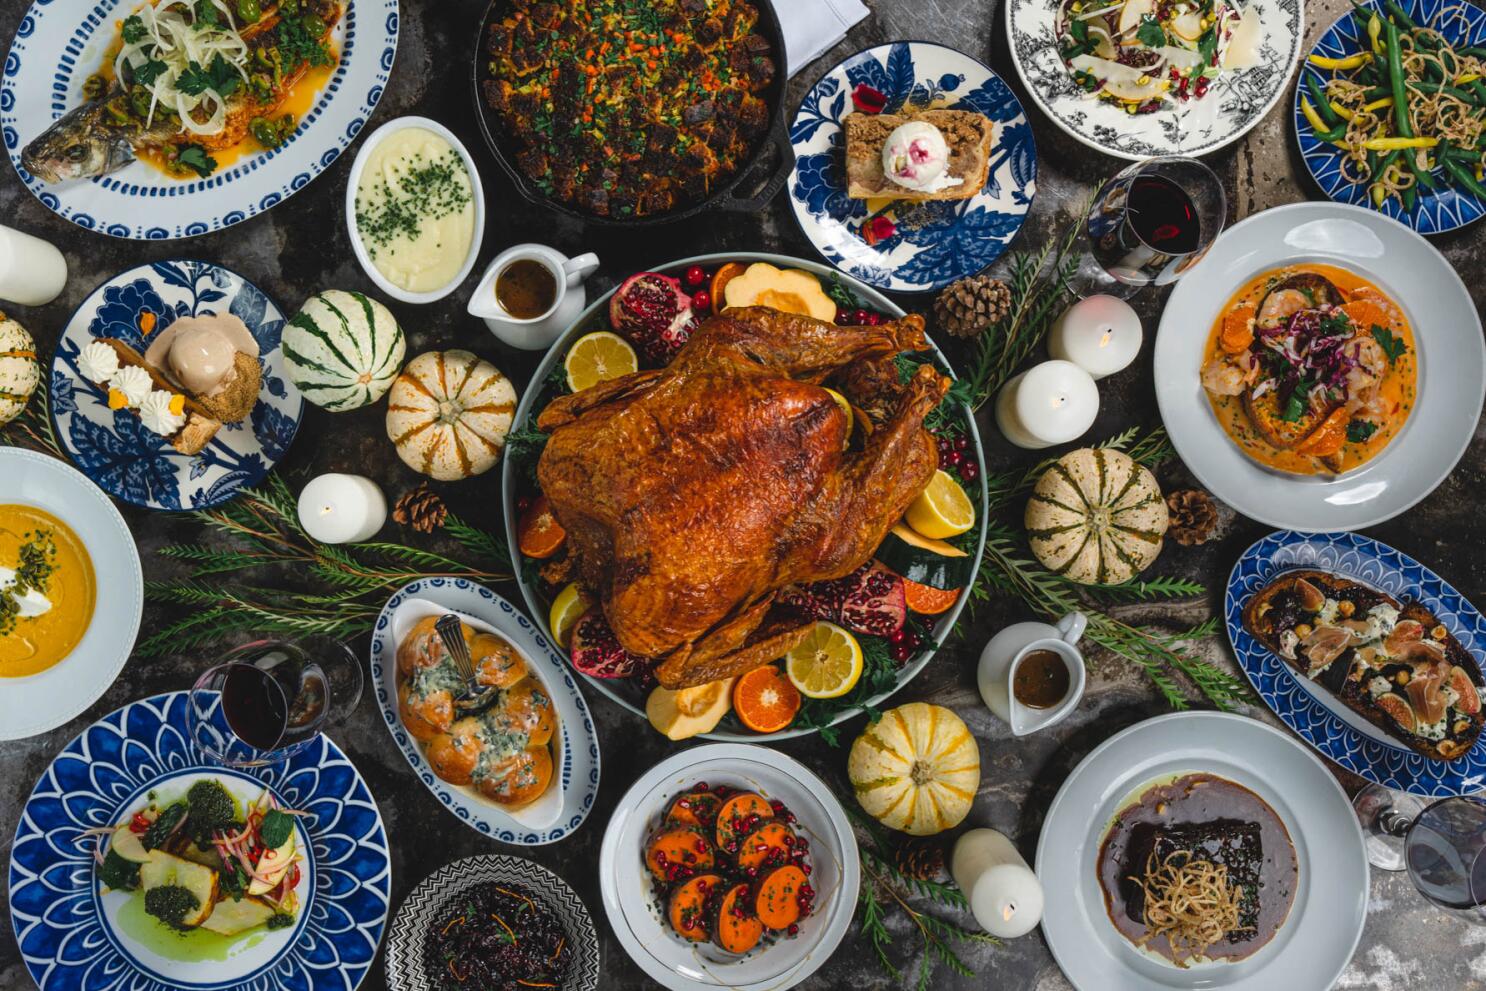 LAVO Las Vegas - Get your Thanksgiving meal to go and